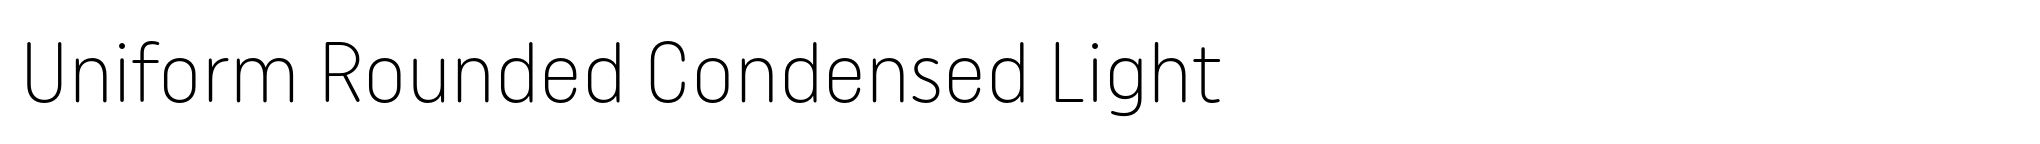 Uniform Rounded Condensed Light image